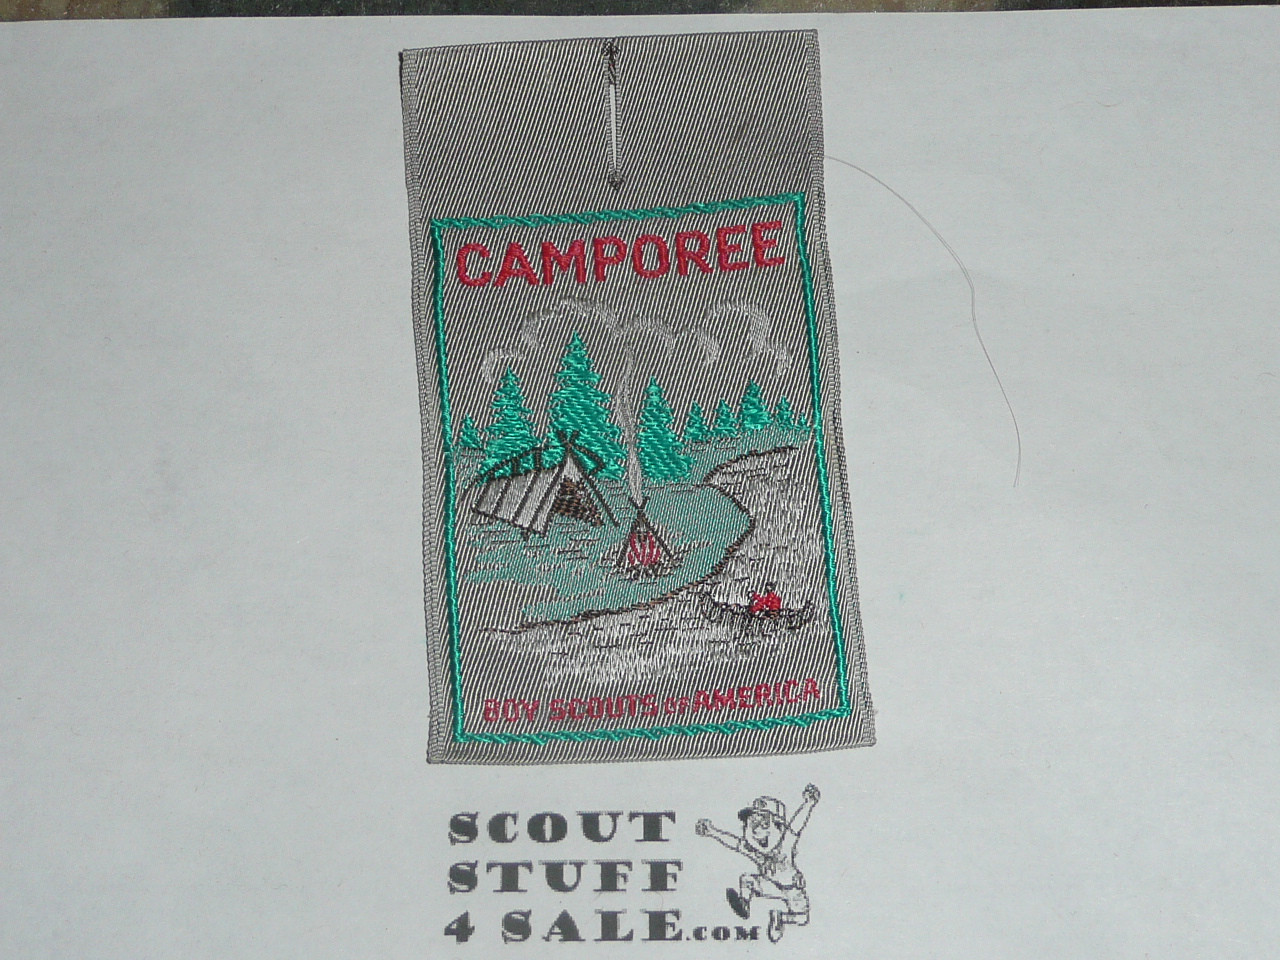 Camporee Patch, Generic BSA issue, Woven with Camping Scene